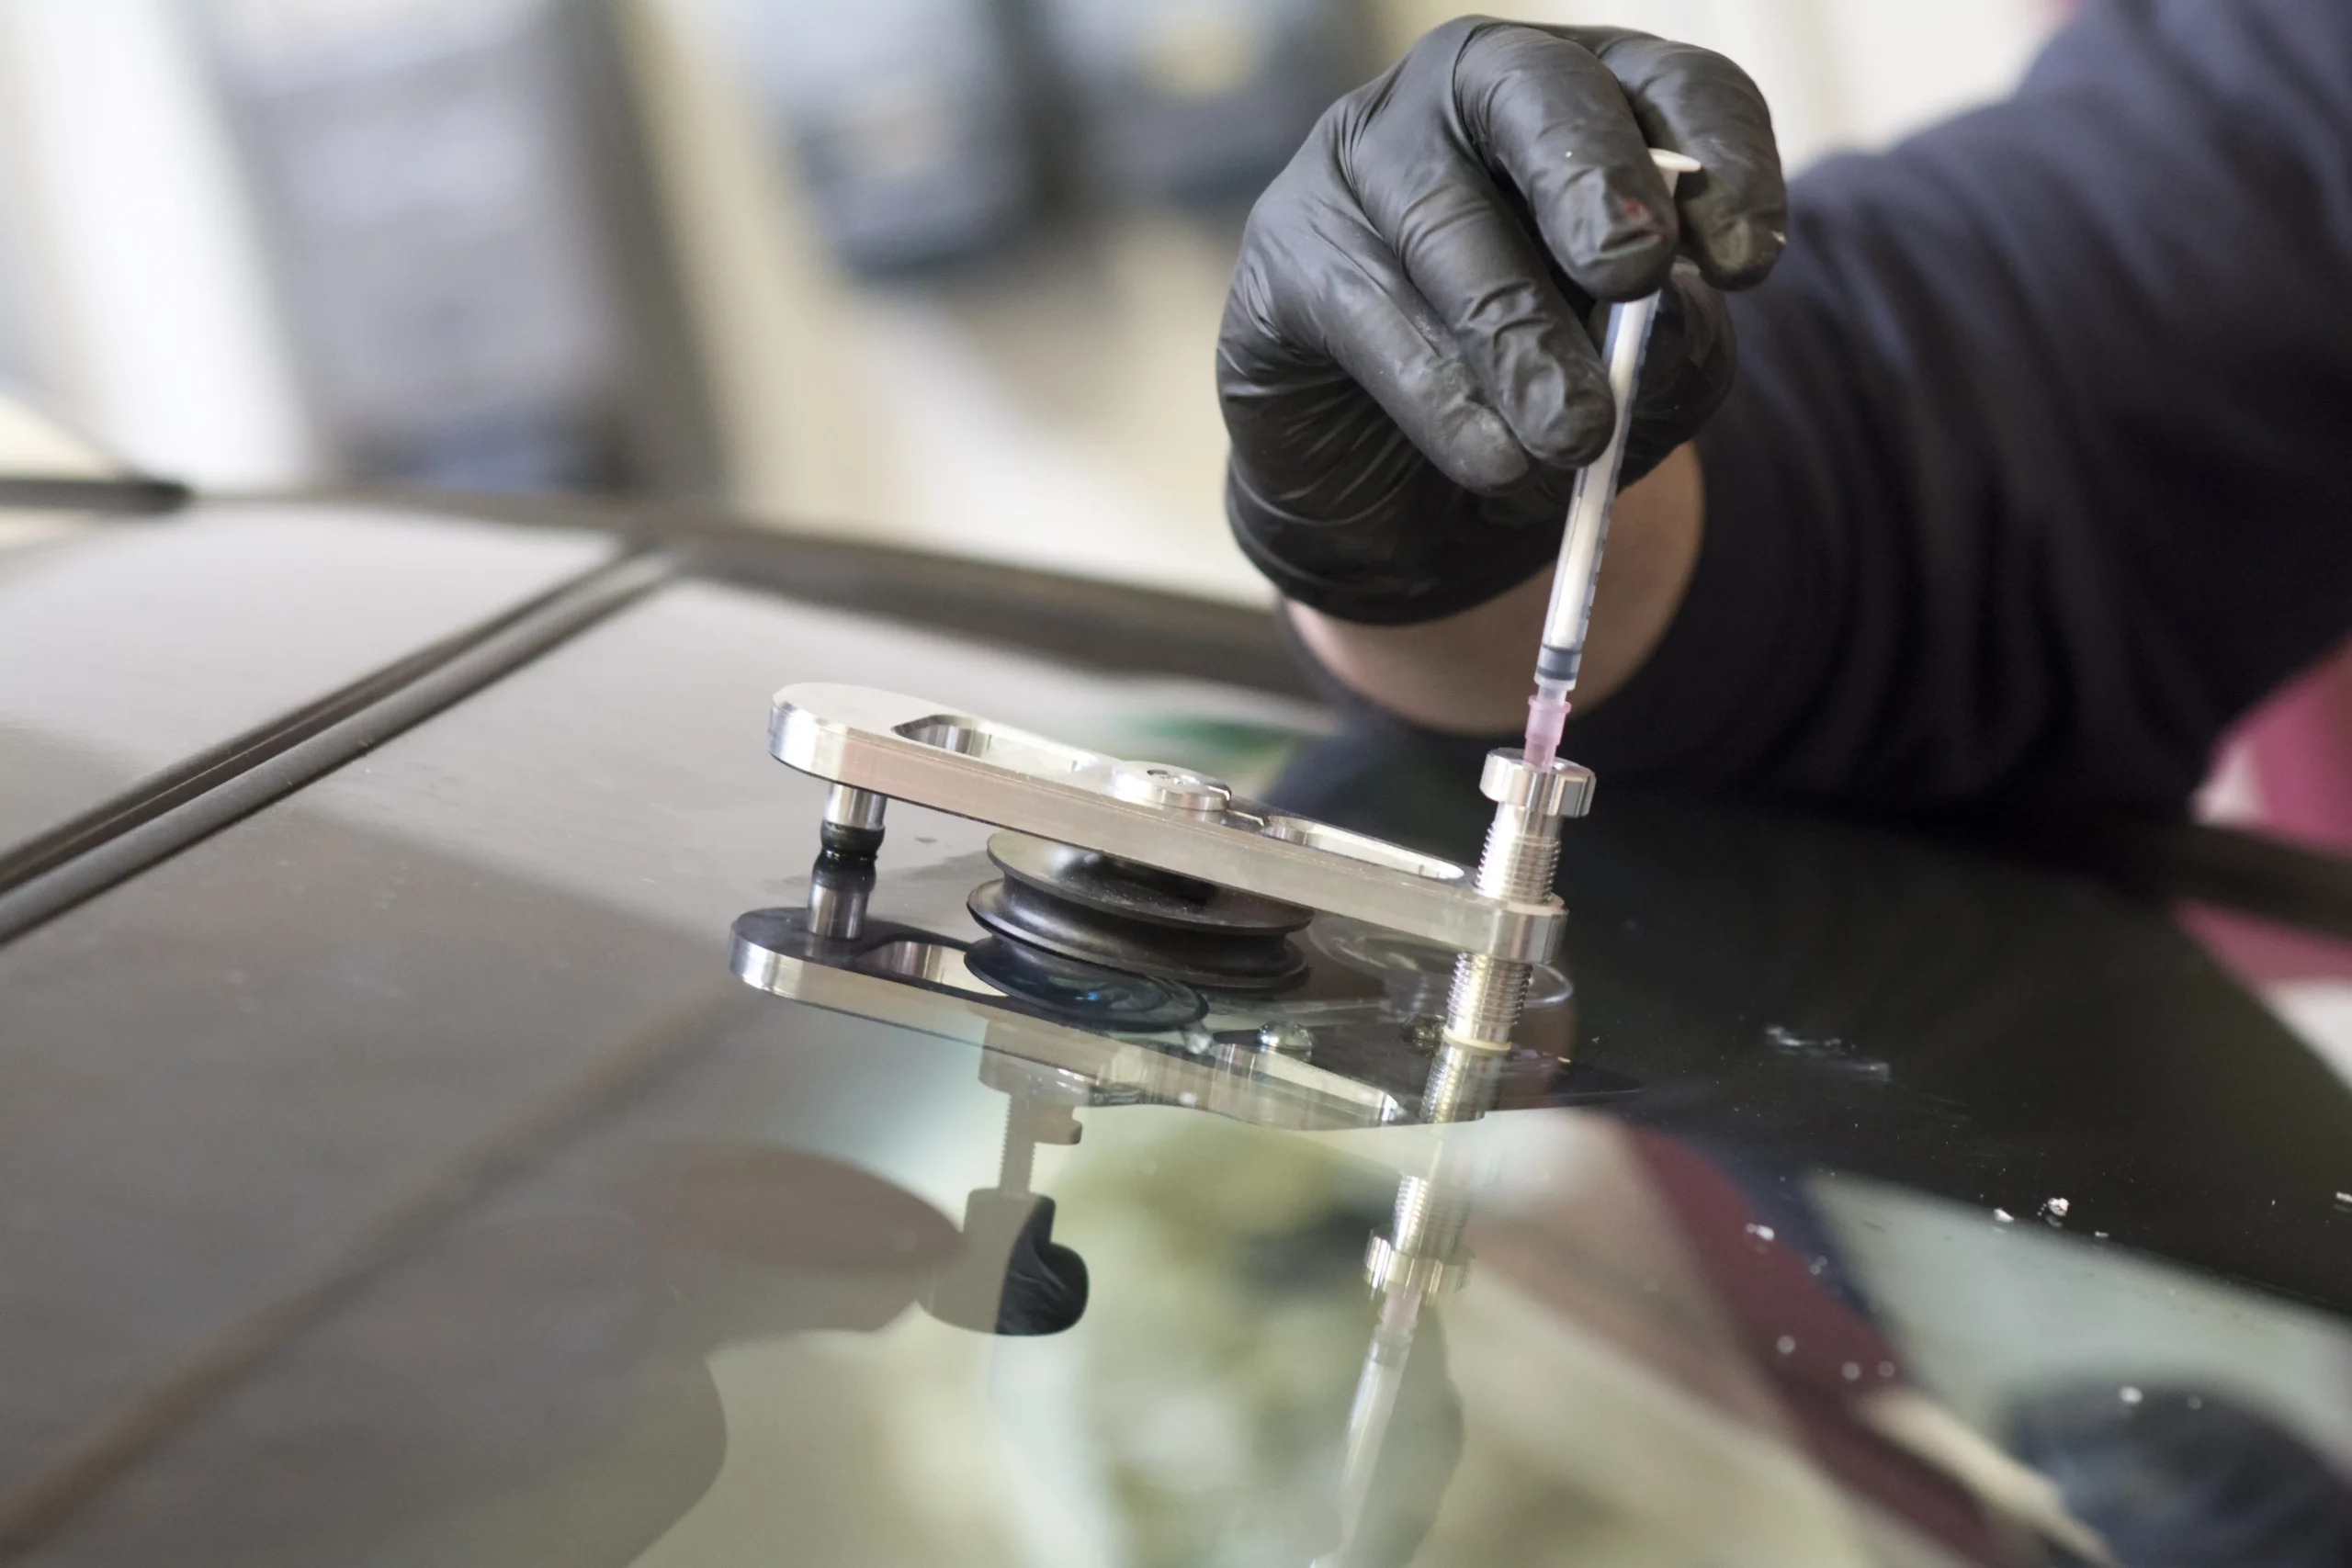 A technician performing a windshield repair and filling the crack in the windshield with resin.